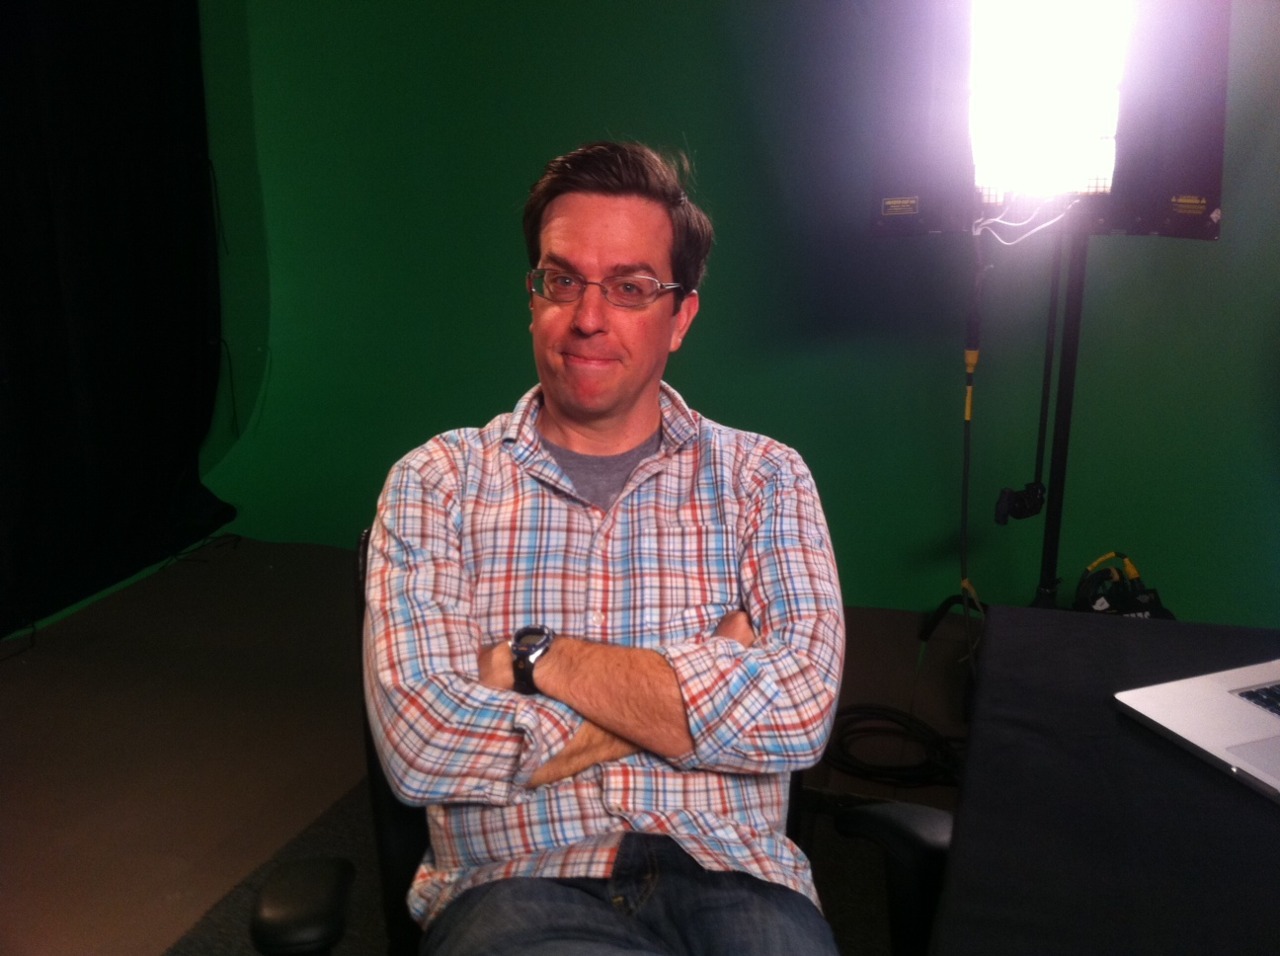 Funny Or Die Live with Ed Helms!
Ed Helms is here now to answer all your burning questions via live video! Ask him anything now or suffer a life of uncertainty and regret.
Ask him questions via Twitter!